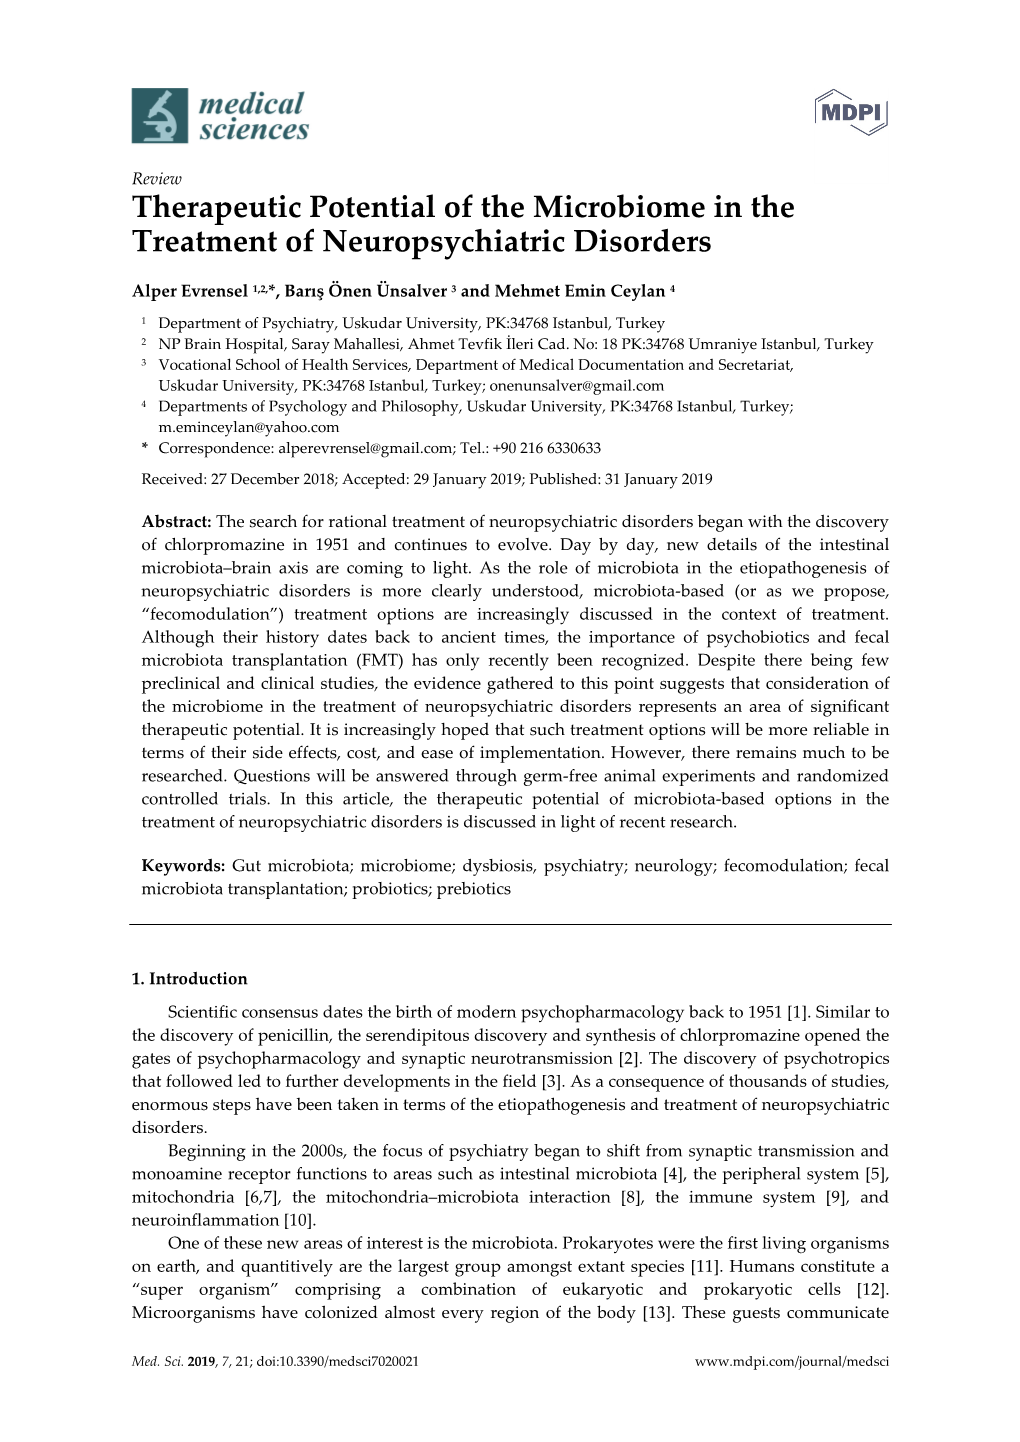 Therapeutic Potential of the Microbiome in the Treatment of Neuropsychiatric Disorders